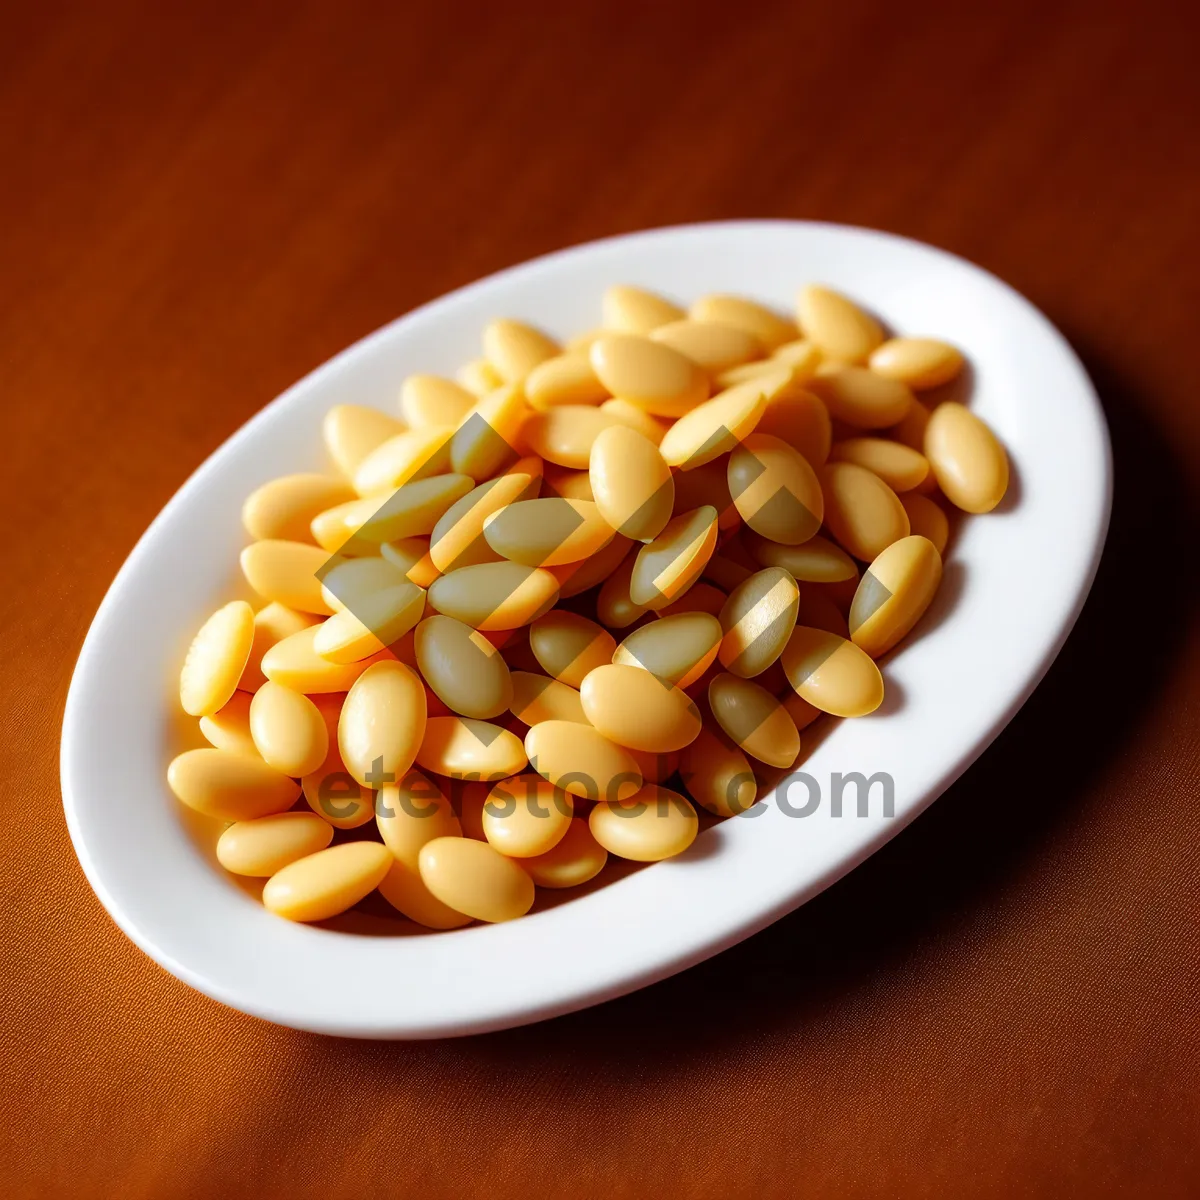 Picture of Yellow Corn Kernel: Nutritious Organic Legume for Healthy Diet